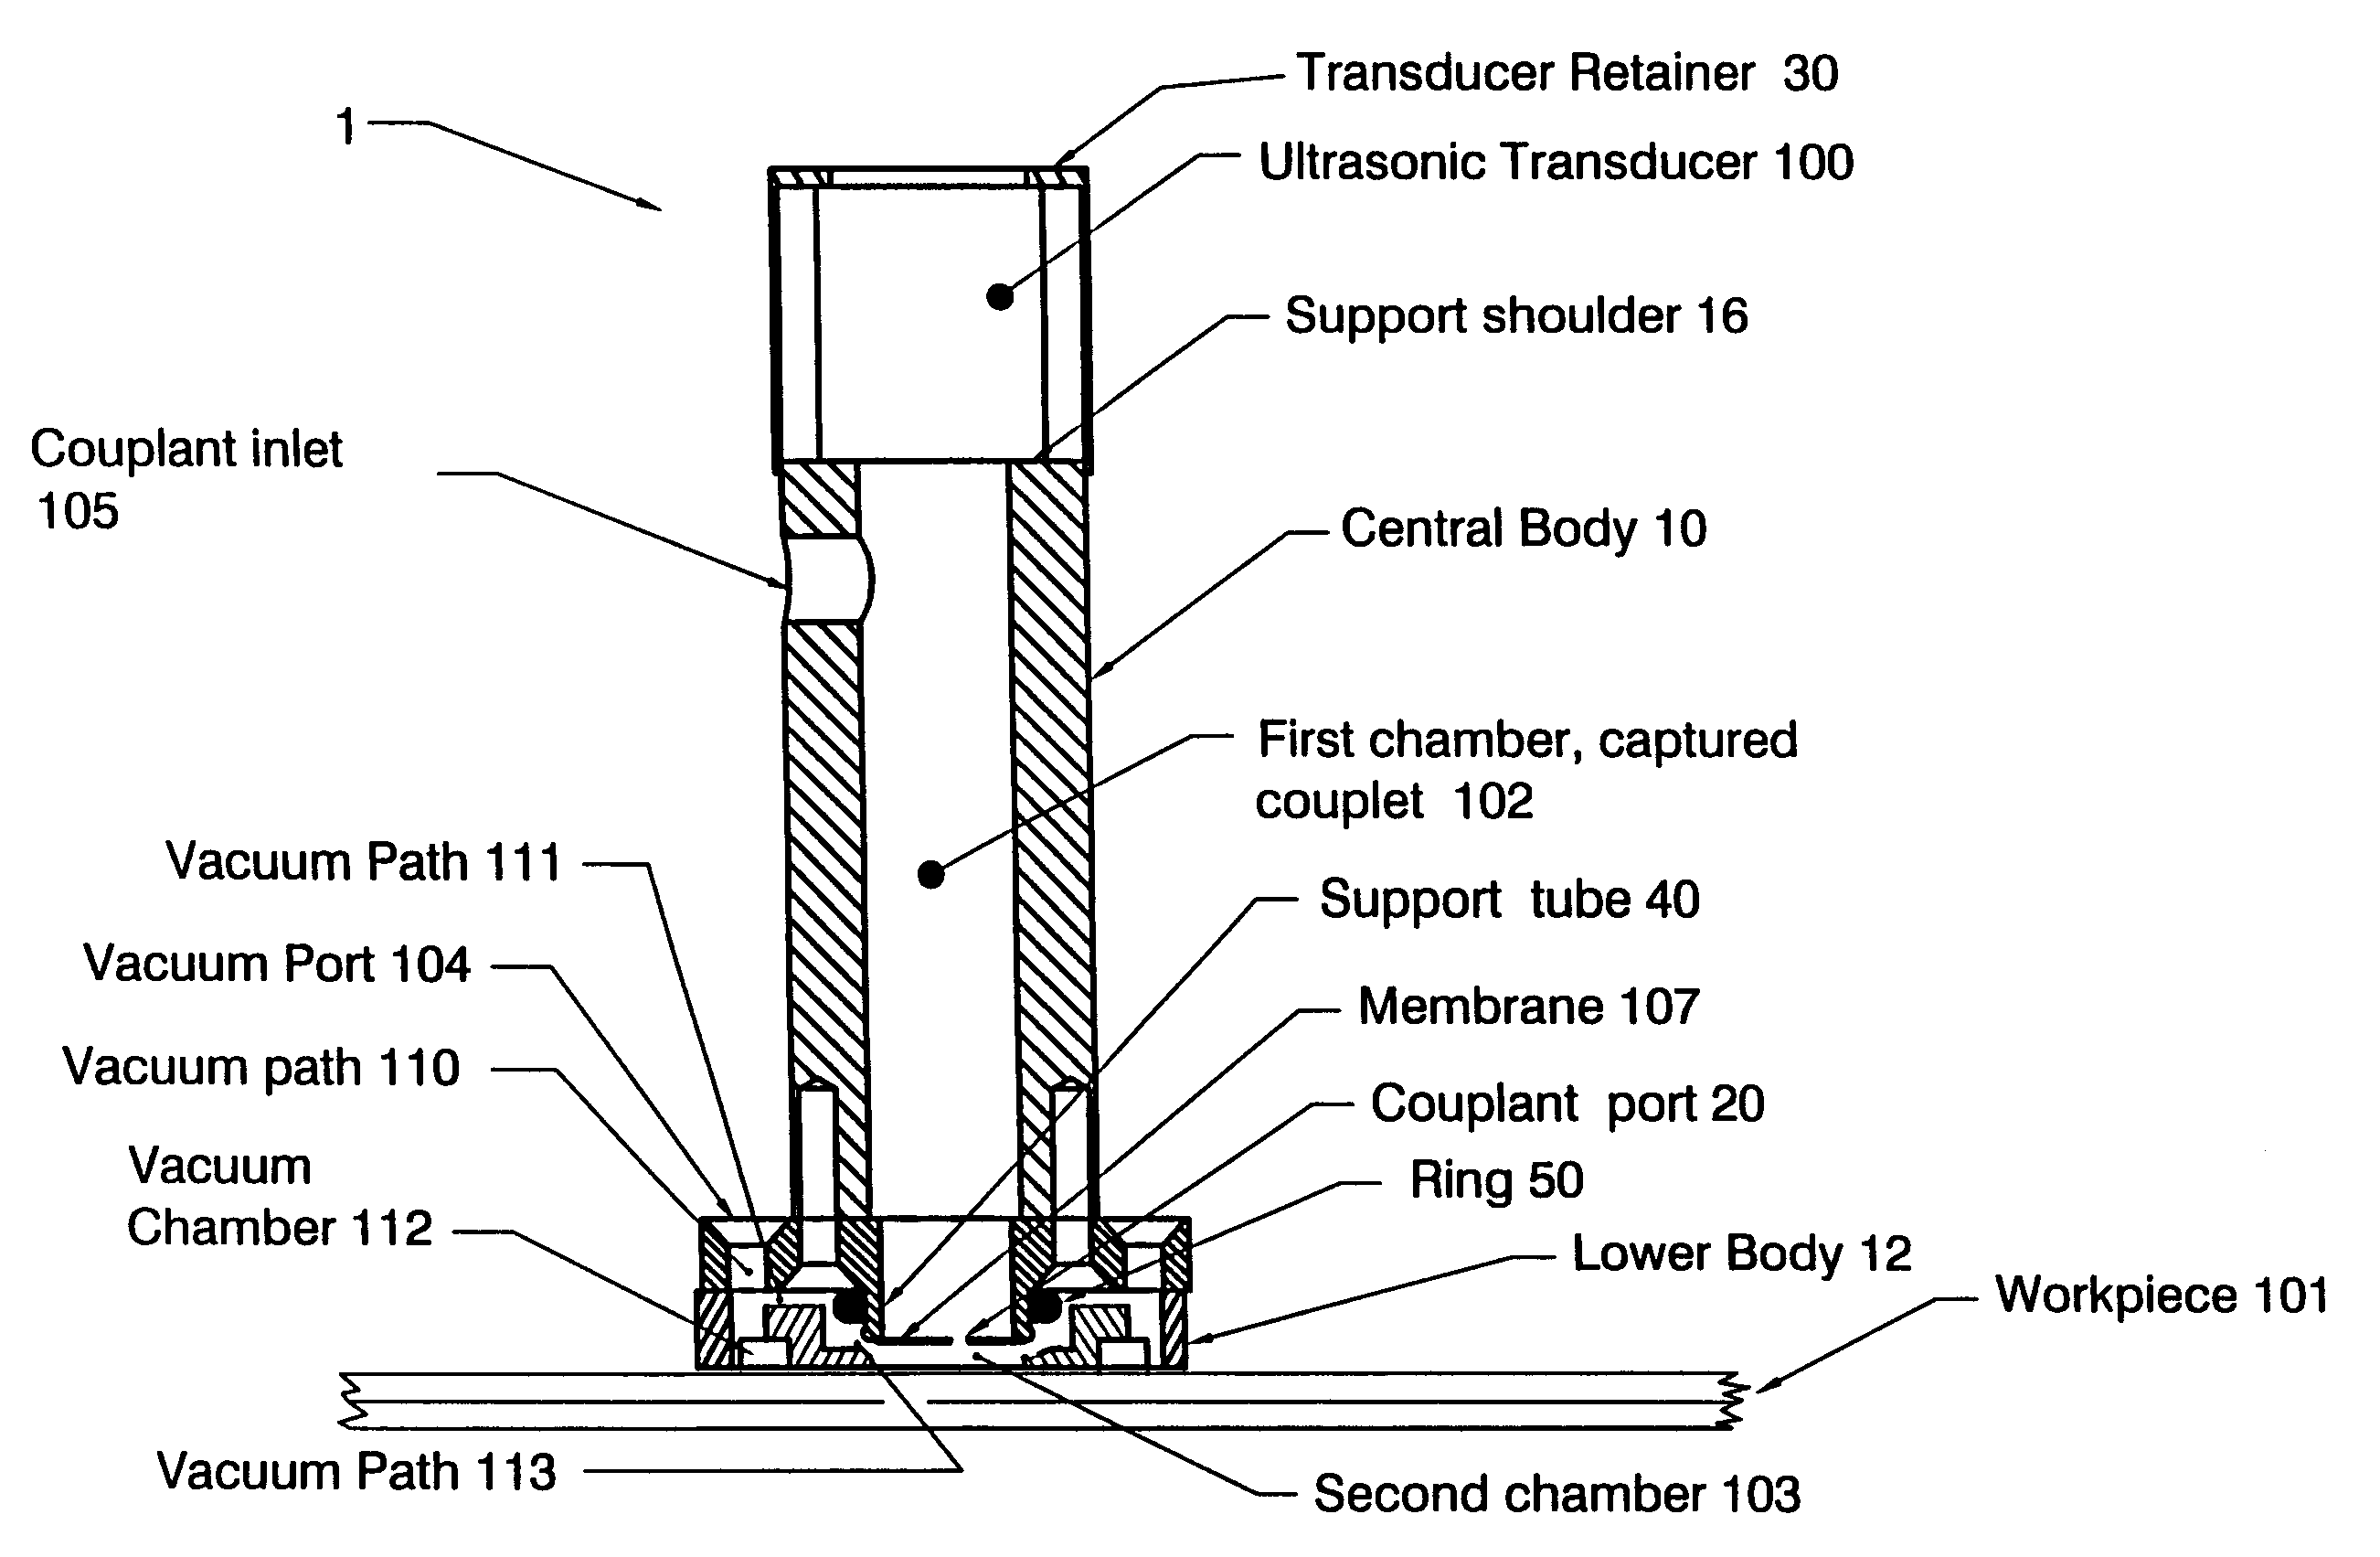 Rigid-contact dripless bubbler (RCDB) apparatus for acoustic inspection of a workpiece in arbitrary scanning orientations